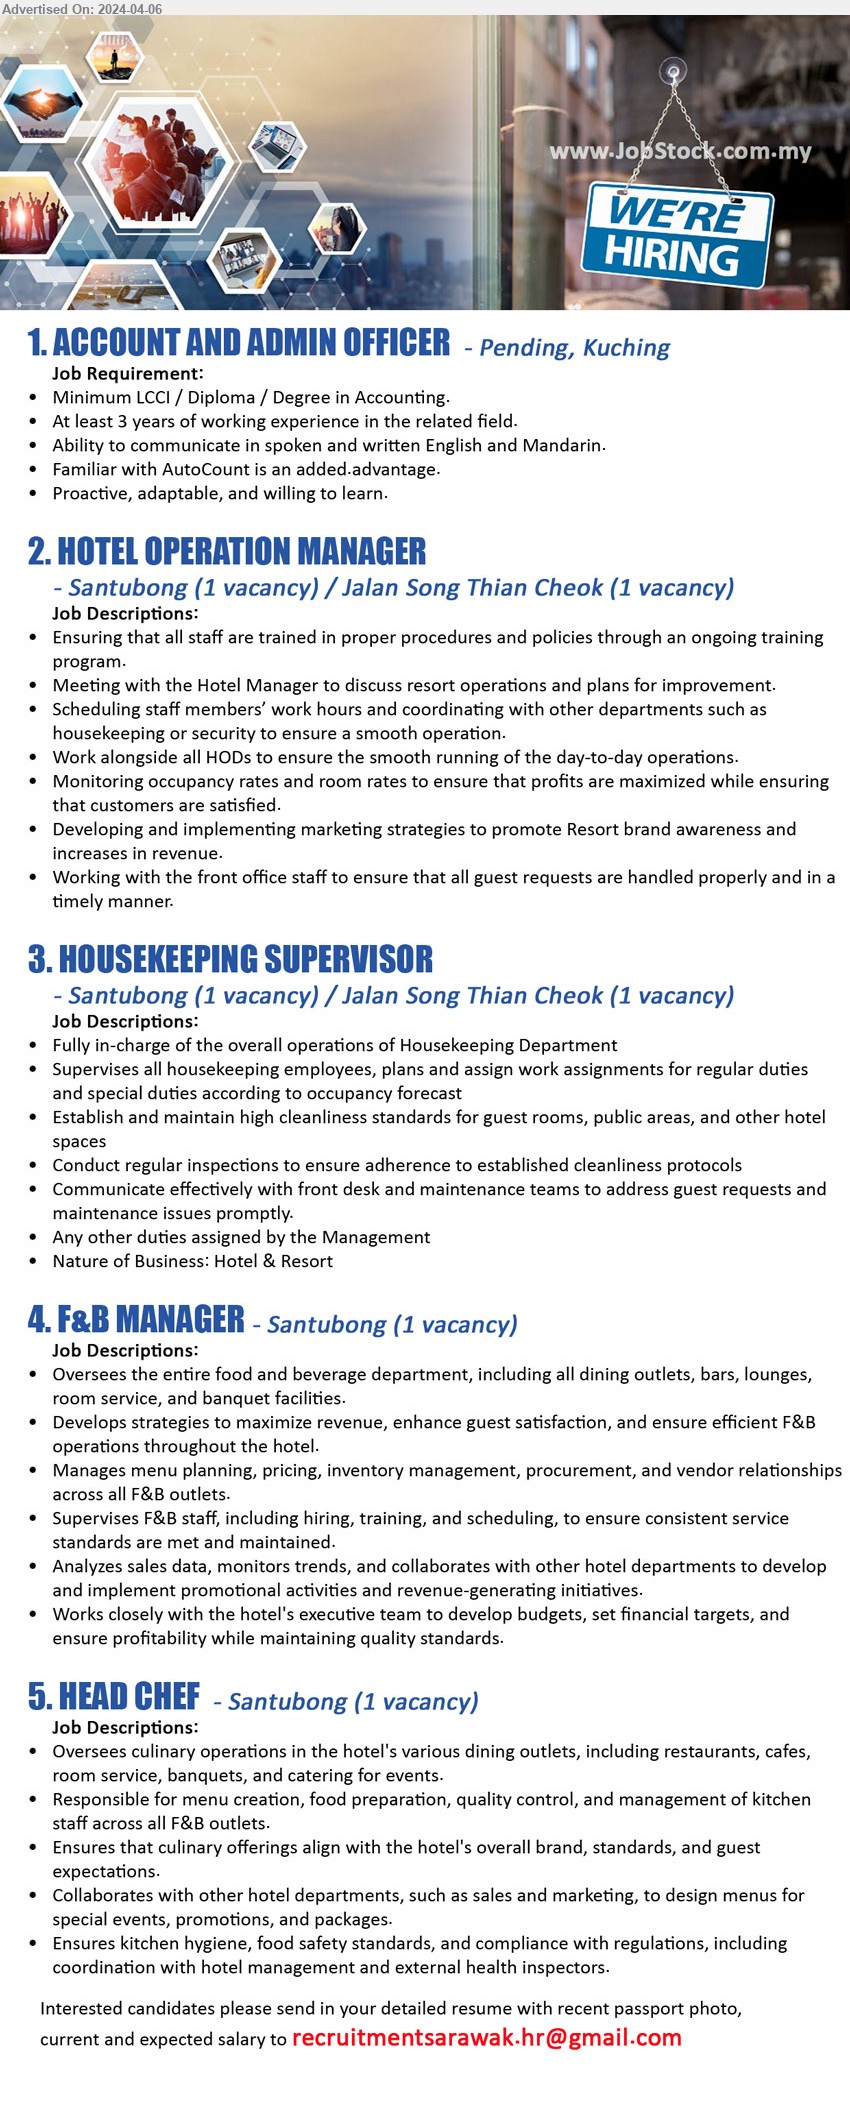 ADVERTISER - 1. ACCOUNT AND ADMIN OFFICER (Kuching - Pending), LCCI / Diploma / Degree in Accounting, 3 yrs. exp.,...
2. HOTEL OPERATION MANAGER  (Kuching - Santubong / Jln Song Thian Cheok), Ensuring that all staff are trained in proper procedures and policies through an ongoing training program.,...
3. HOUSEKEEPING SUPERVISOR  (Kuching - Santubong / Jln Song Thian Cheok), Fully in-charge of the overall operations of Housekeeping Department,...
4. F&B MANAGER (Kuching - Santubong), Oversees the entire food and beverage department, including all dining outlets, bars, lounges, room service, and banquet facilities.,...
5. HEAD CHEF (Kuching - Santubong), Oversees culinary operations in the hotel's various dining outlets, including restaurants, cafes, room service, banquets, and catering for events,...
Email resume to ...
